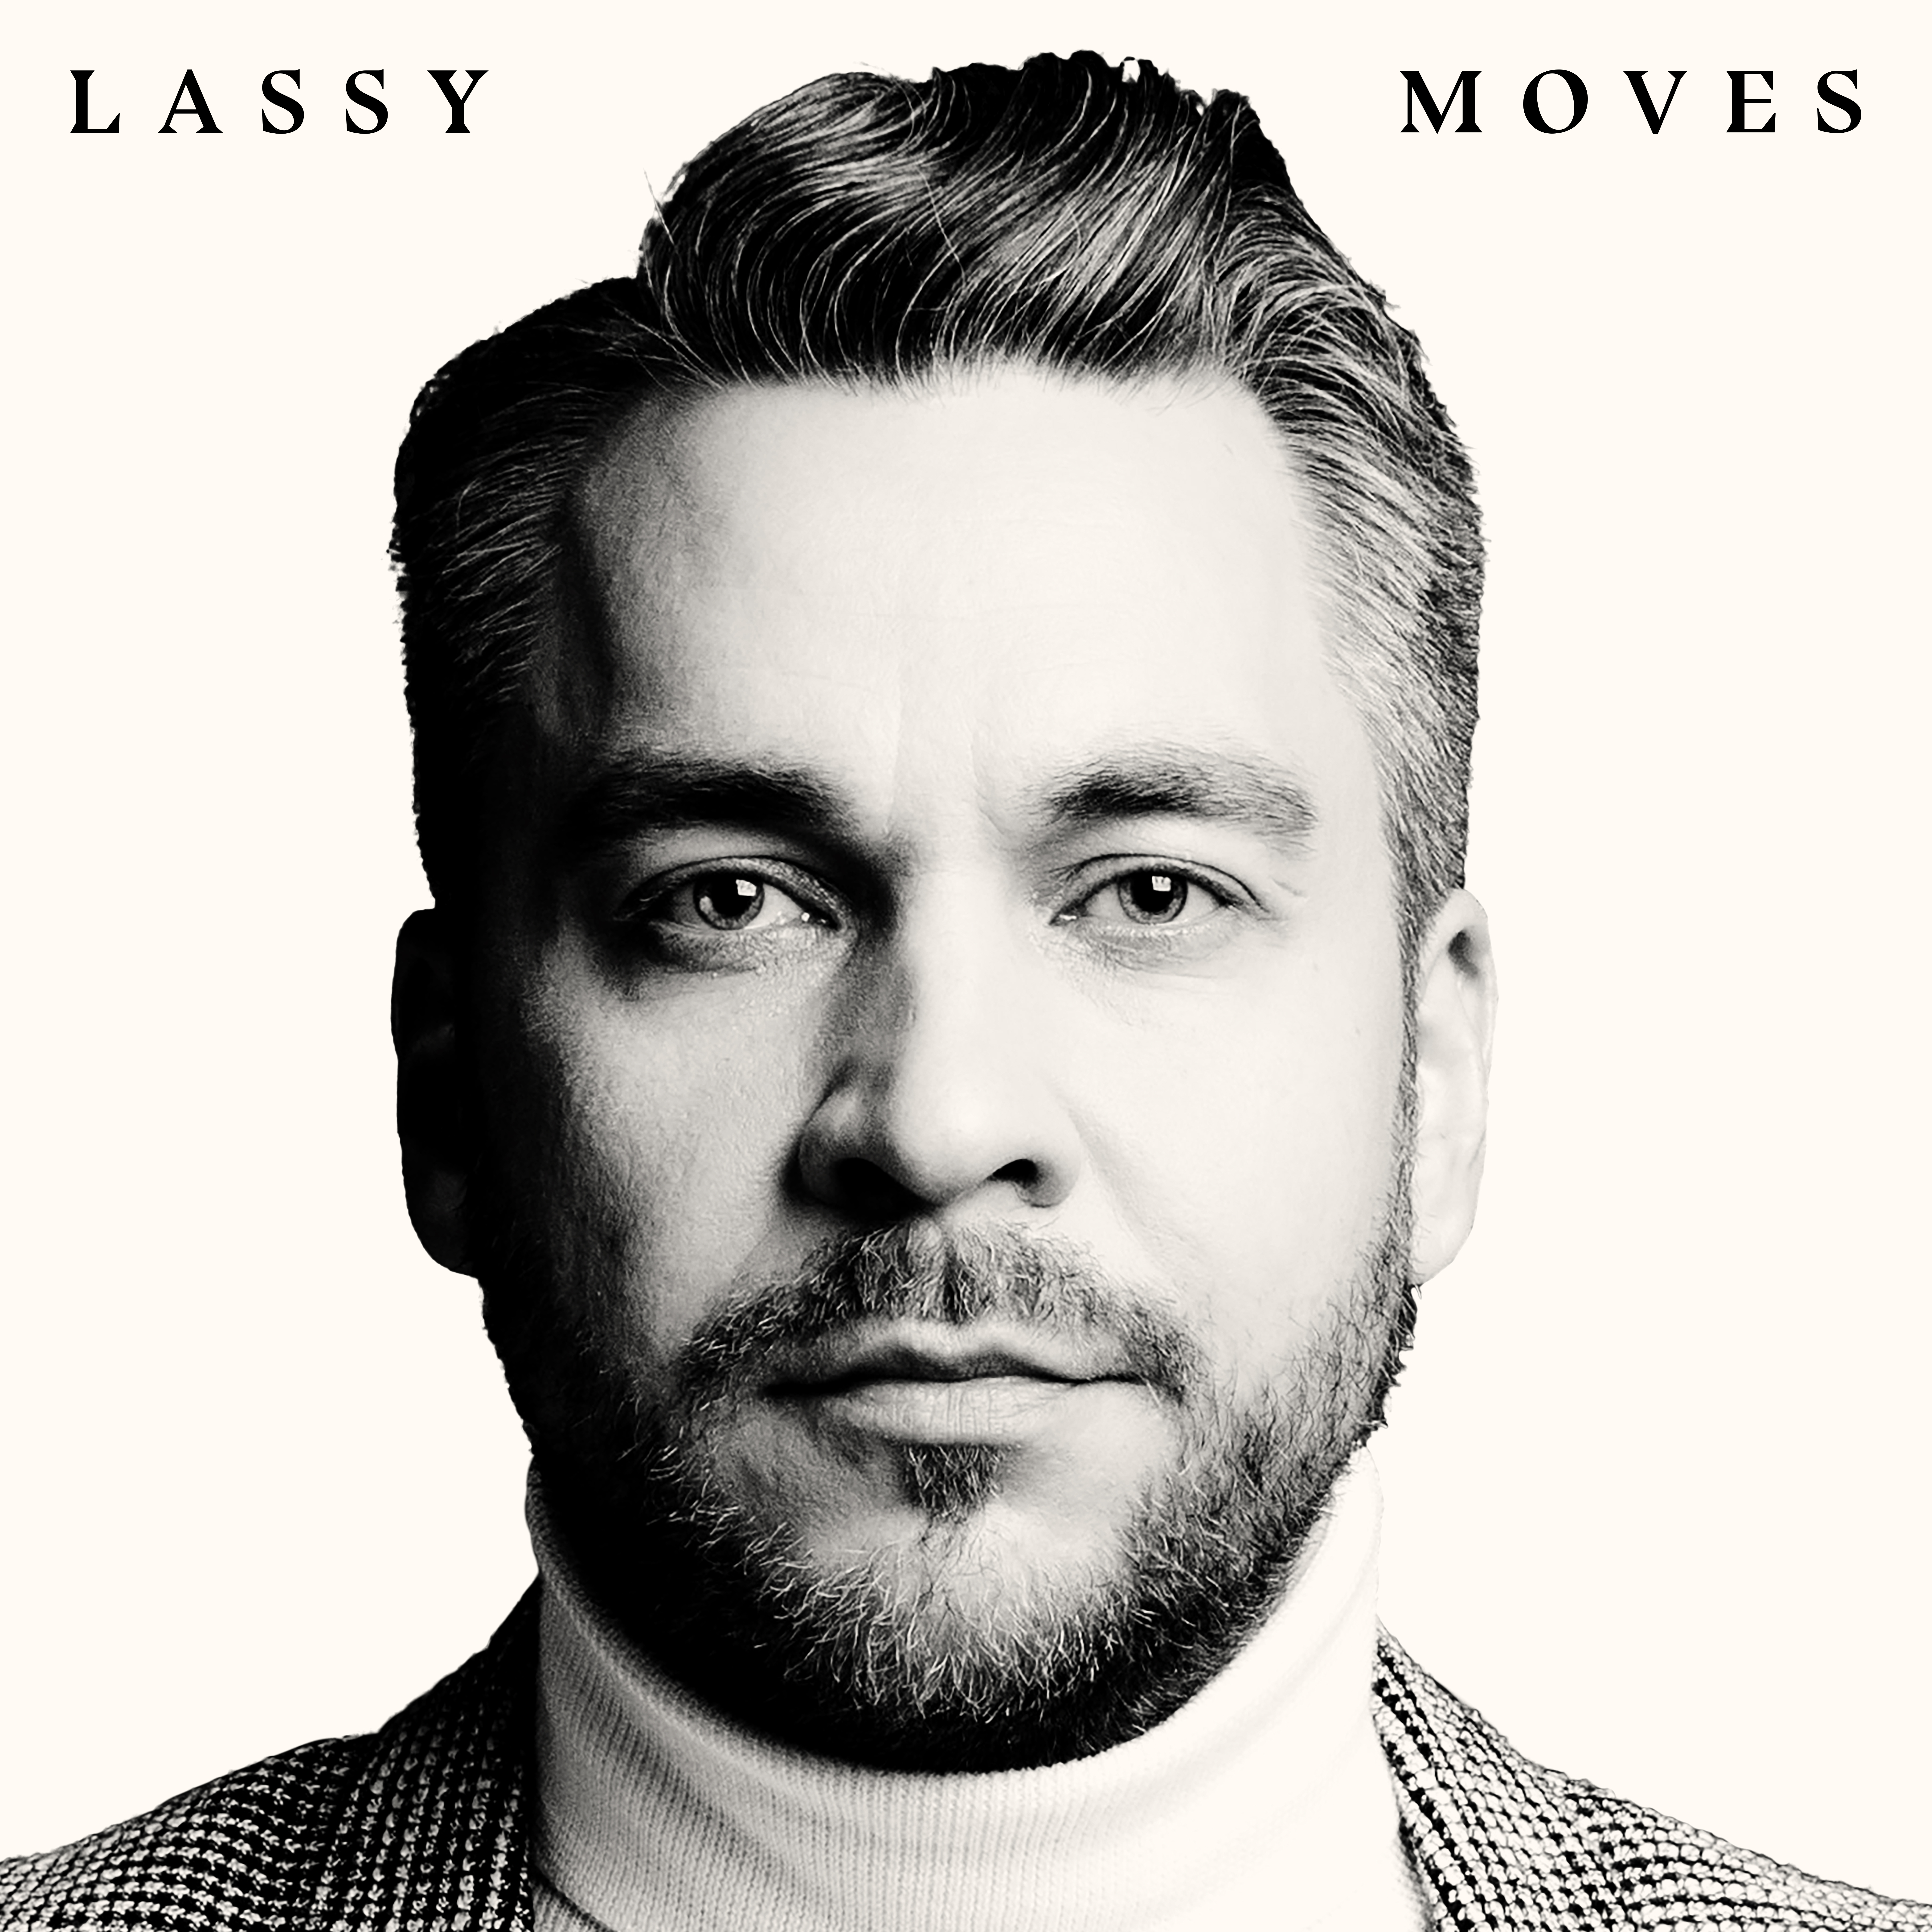 Timo Lassy – Moves